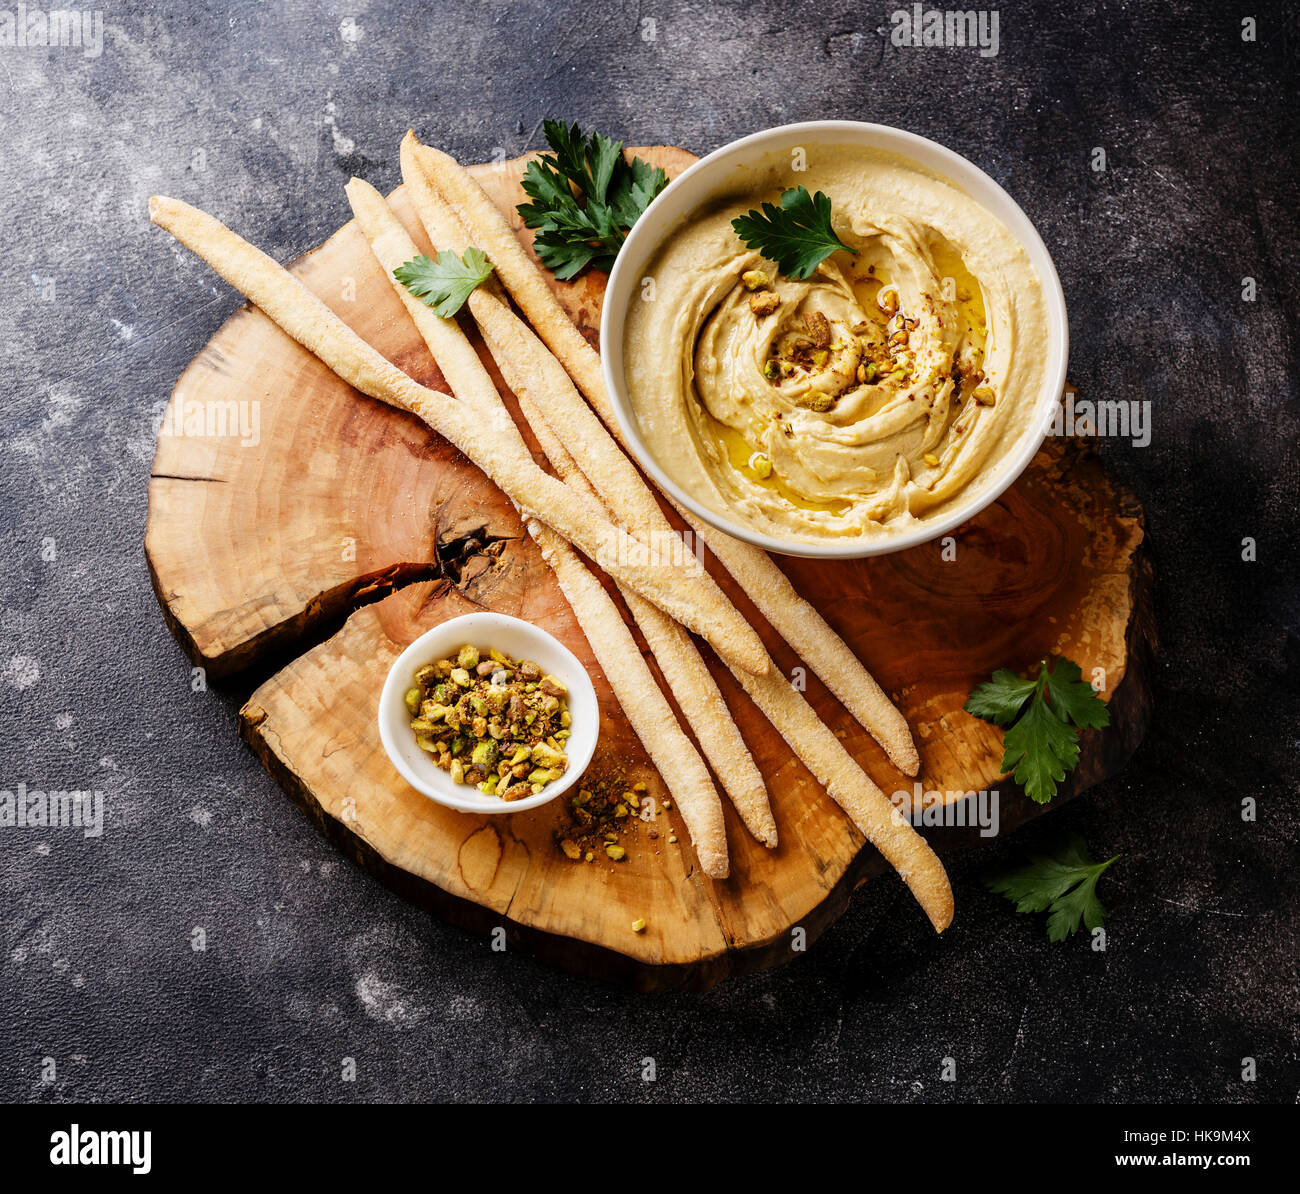 Homemade hummus with pistachios and bread sticks on black stone background Stock Photo